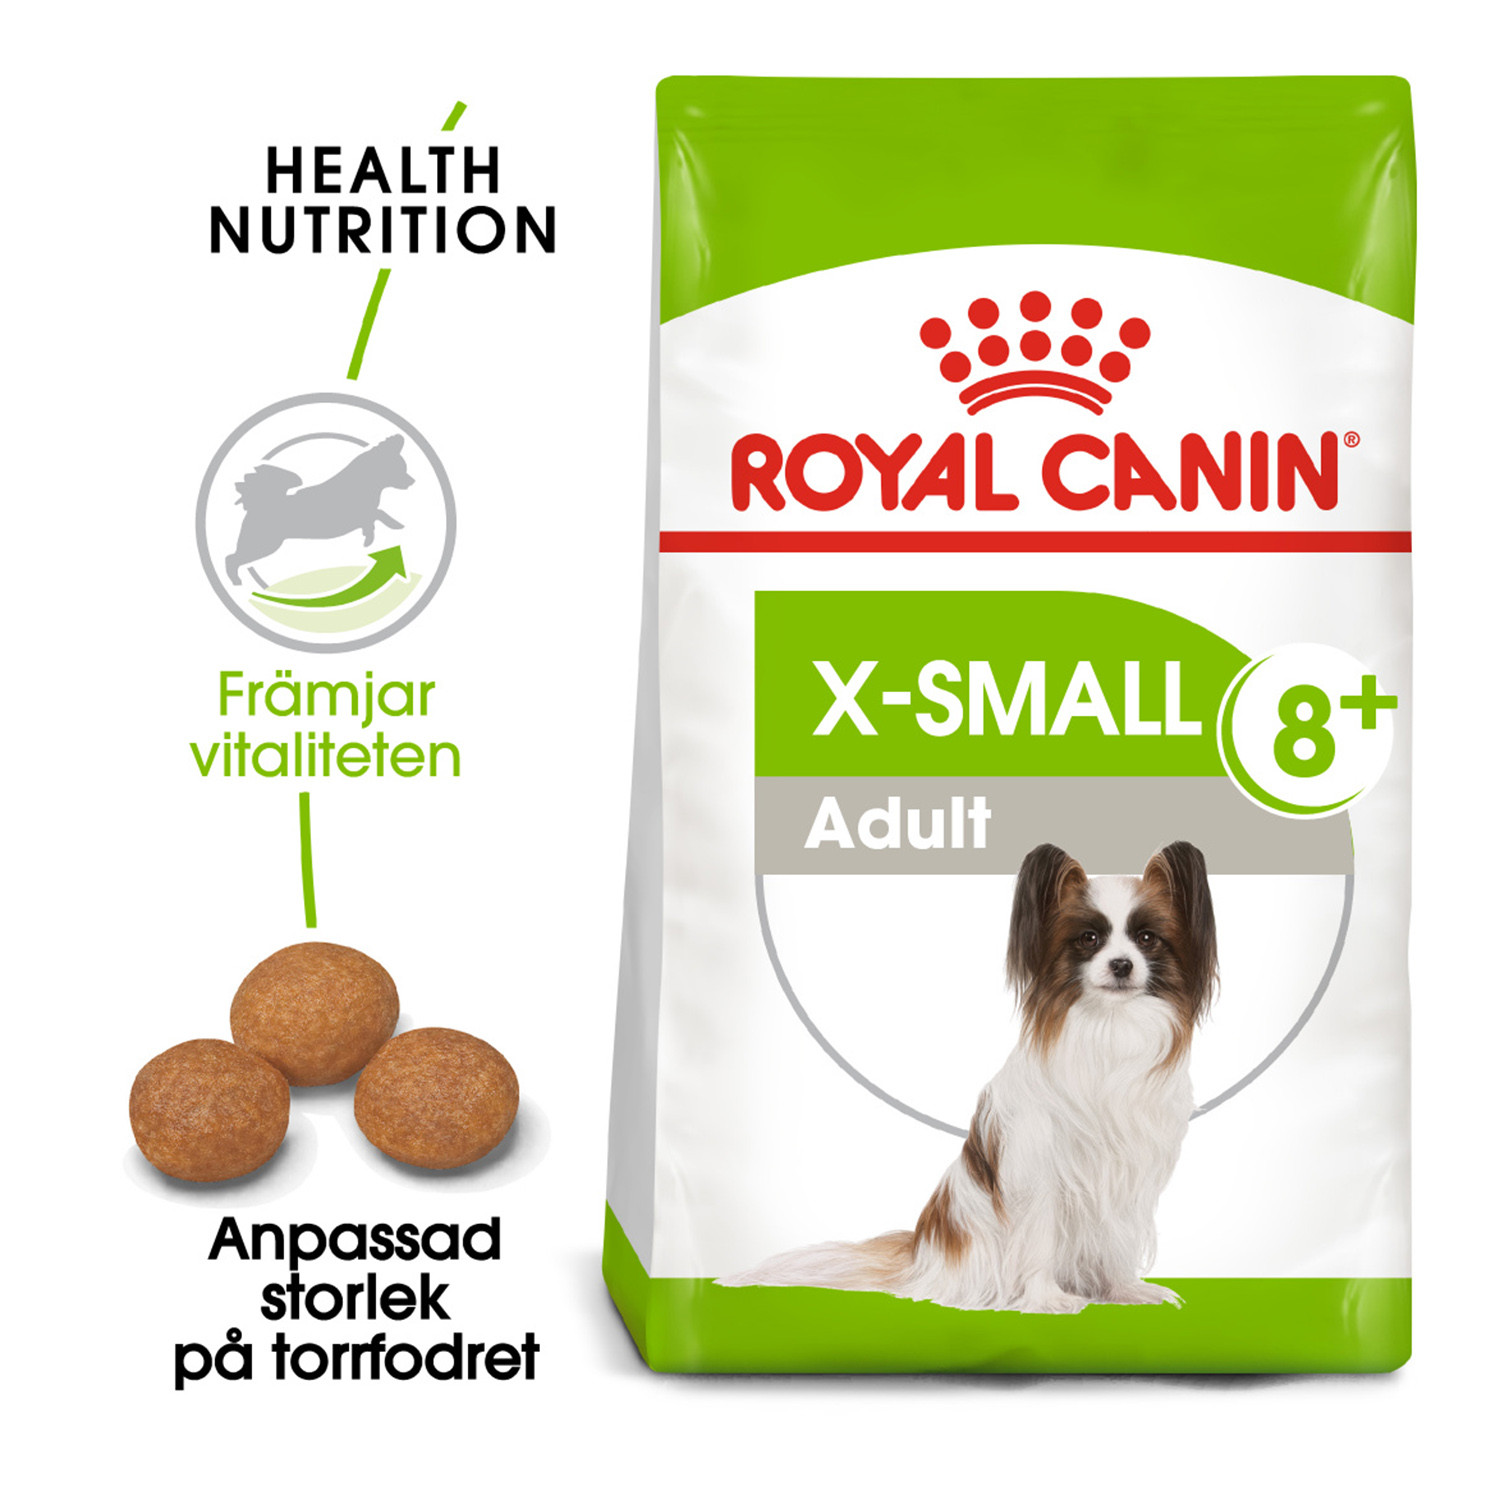 X-small adult +8 royal canin 500 g